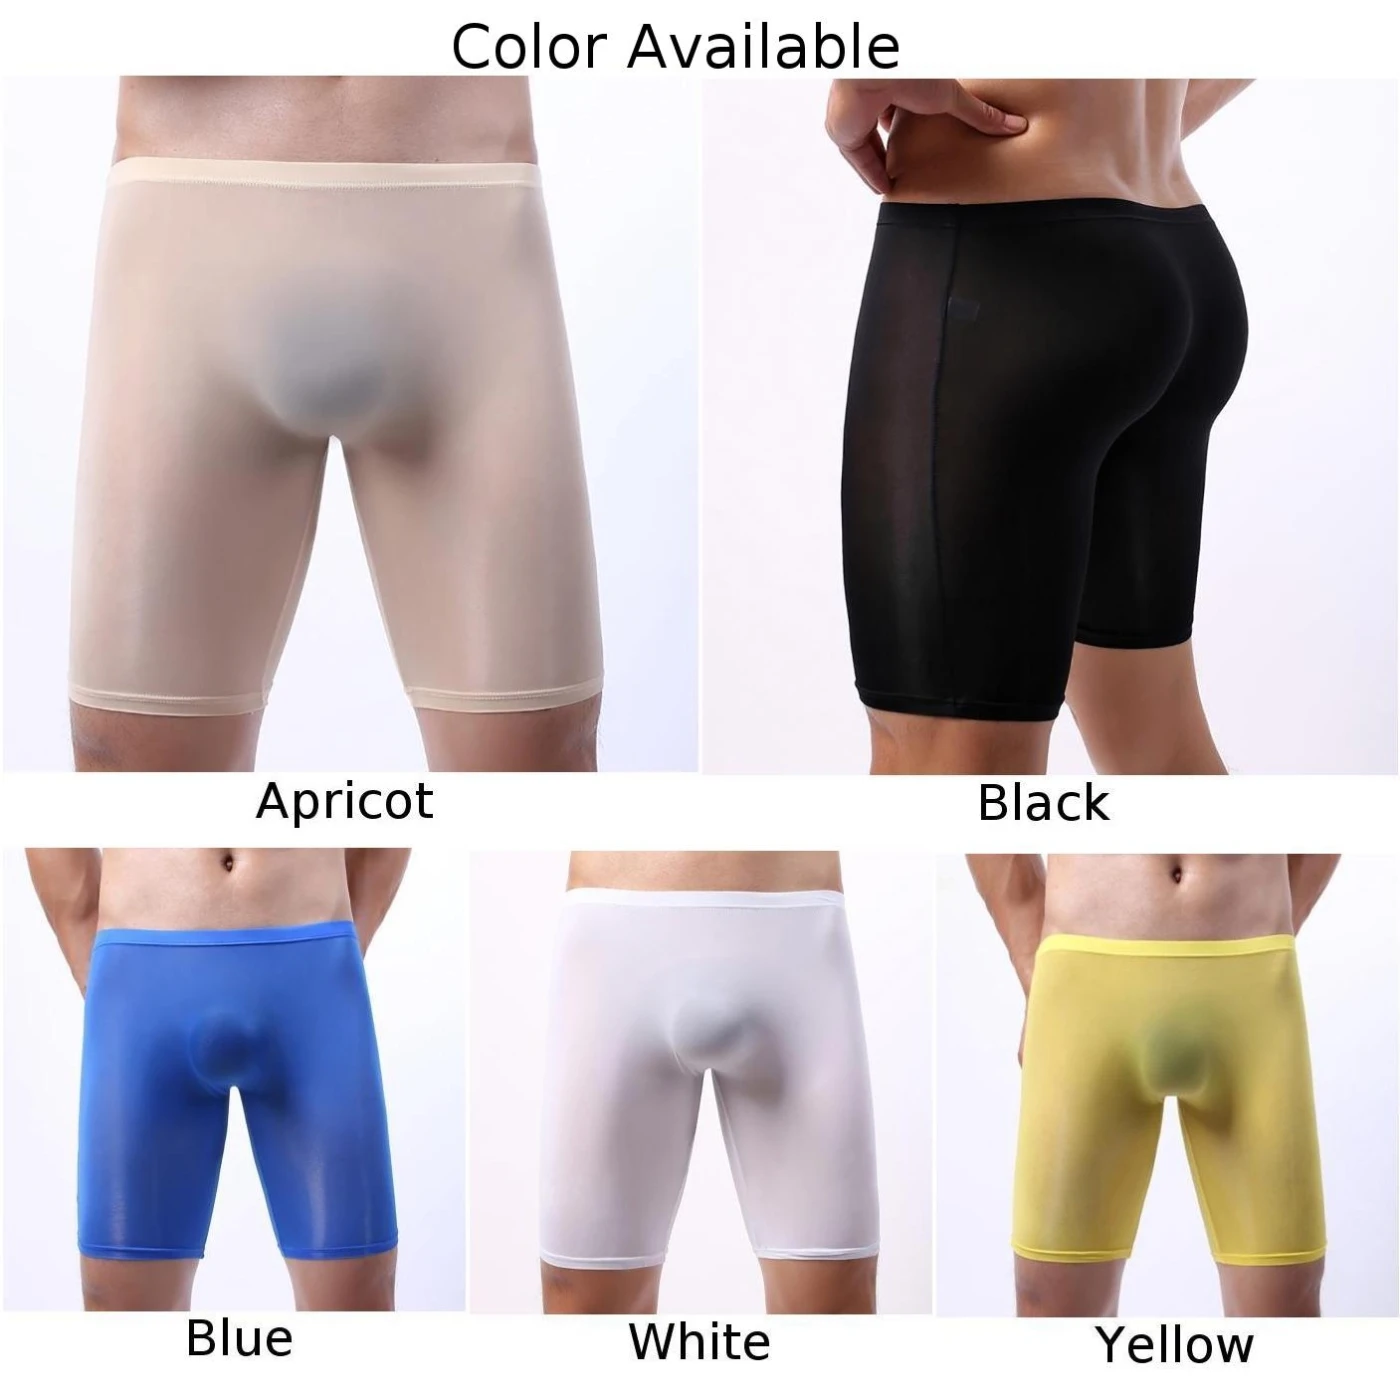 

Men Sexy Boxer Thin U-convex Shorts Sport Seamless Soft Bulge Pouch Underpants See-through Knickers Semi-transparent Trunks